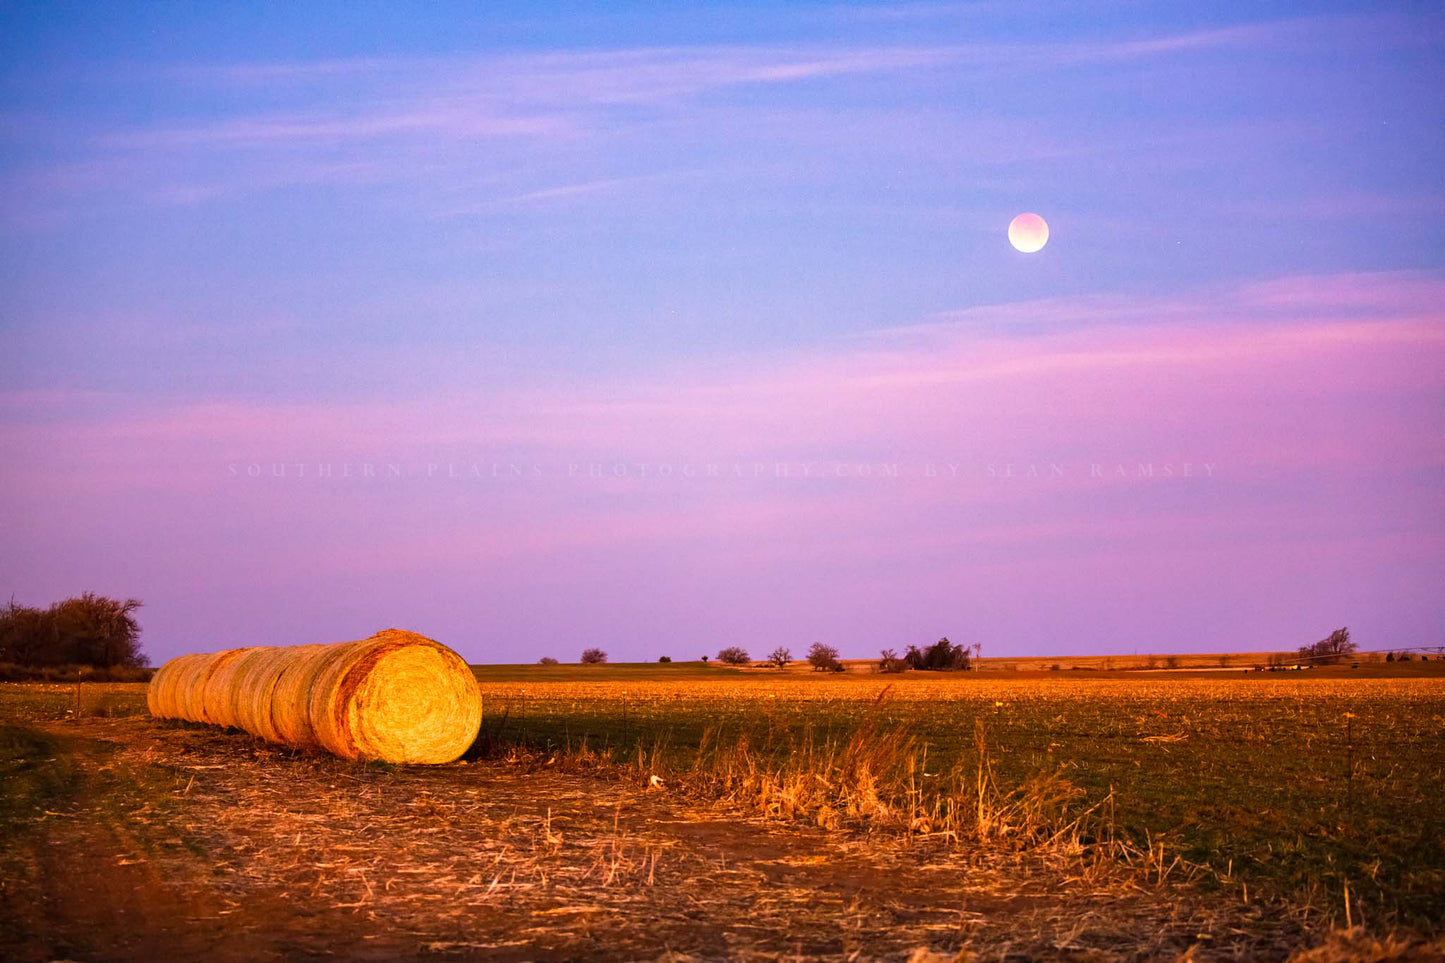 Celestial photography print of a blood moon over a row of round hay bales in a field at sunrise in western Oklahoma by Sean Ramsey of Southern Plains Photography.